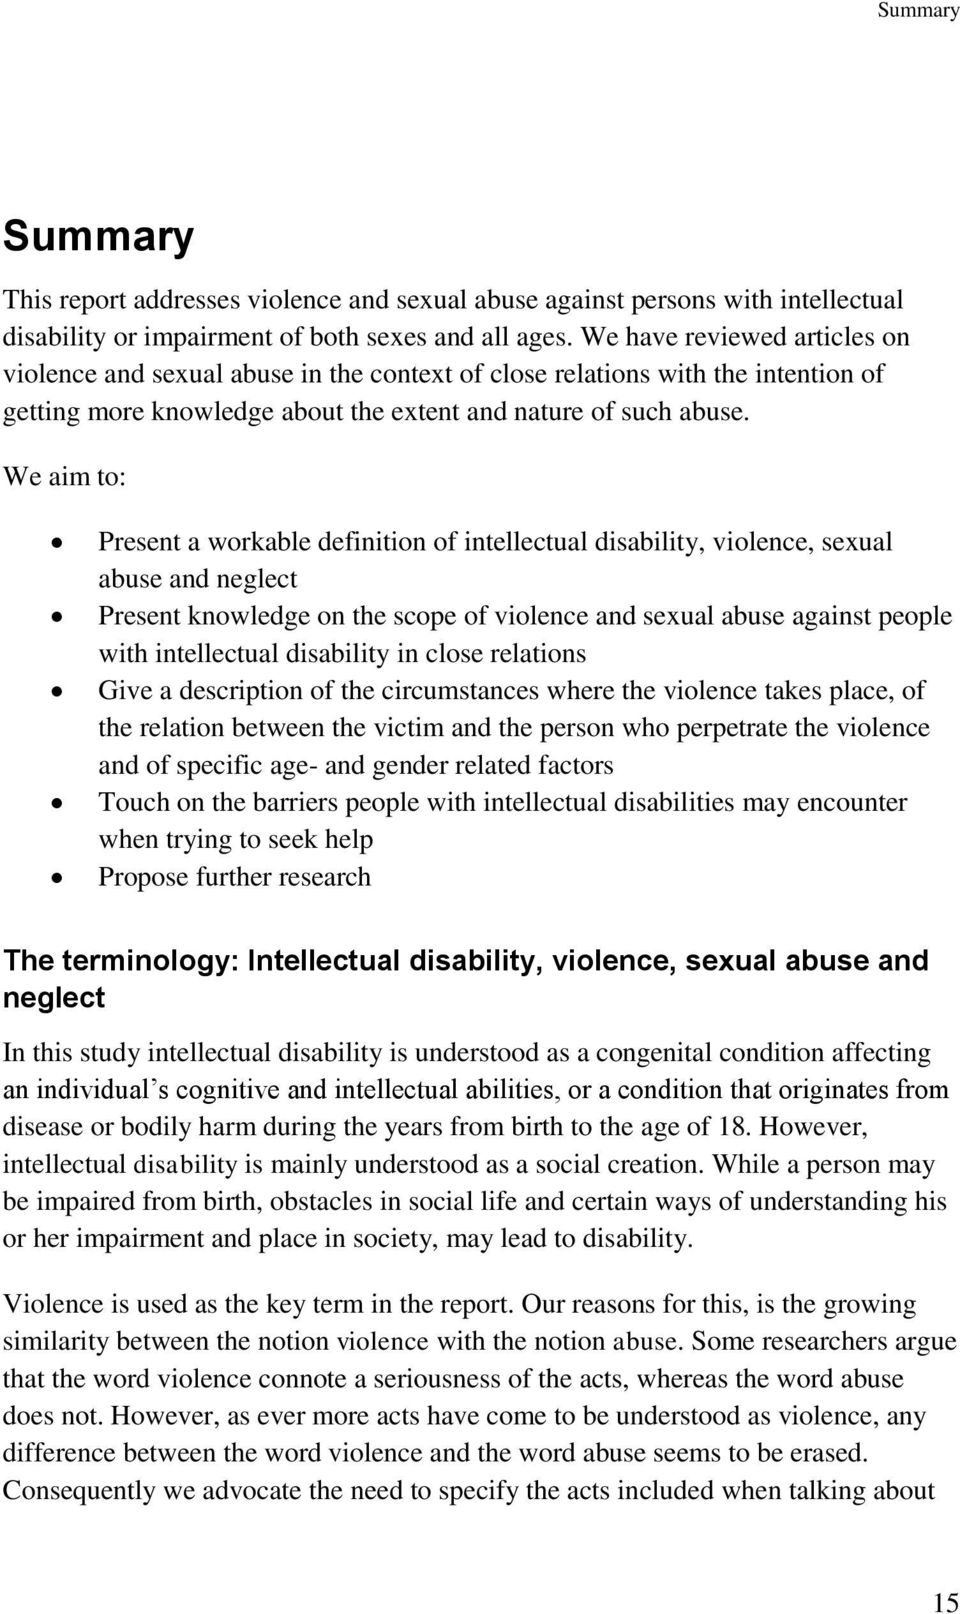 We aim to: Present a workable definition of intellectual disability, violence, sexual abuse and neglect Present knowledge on the scope of violence and sexual abuse against people with intellectual